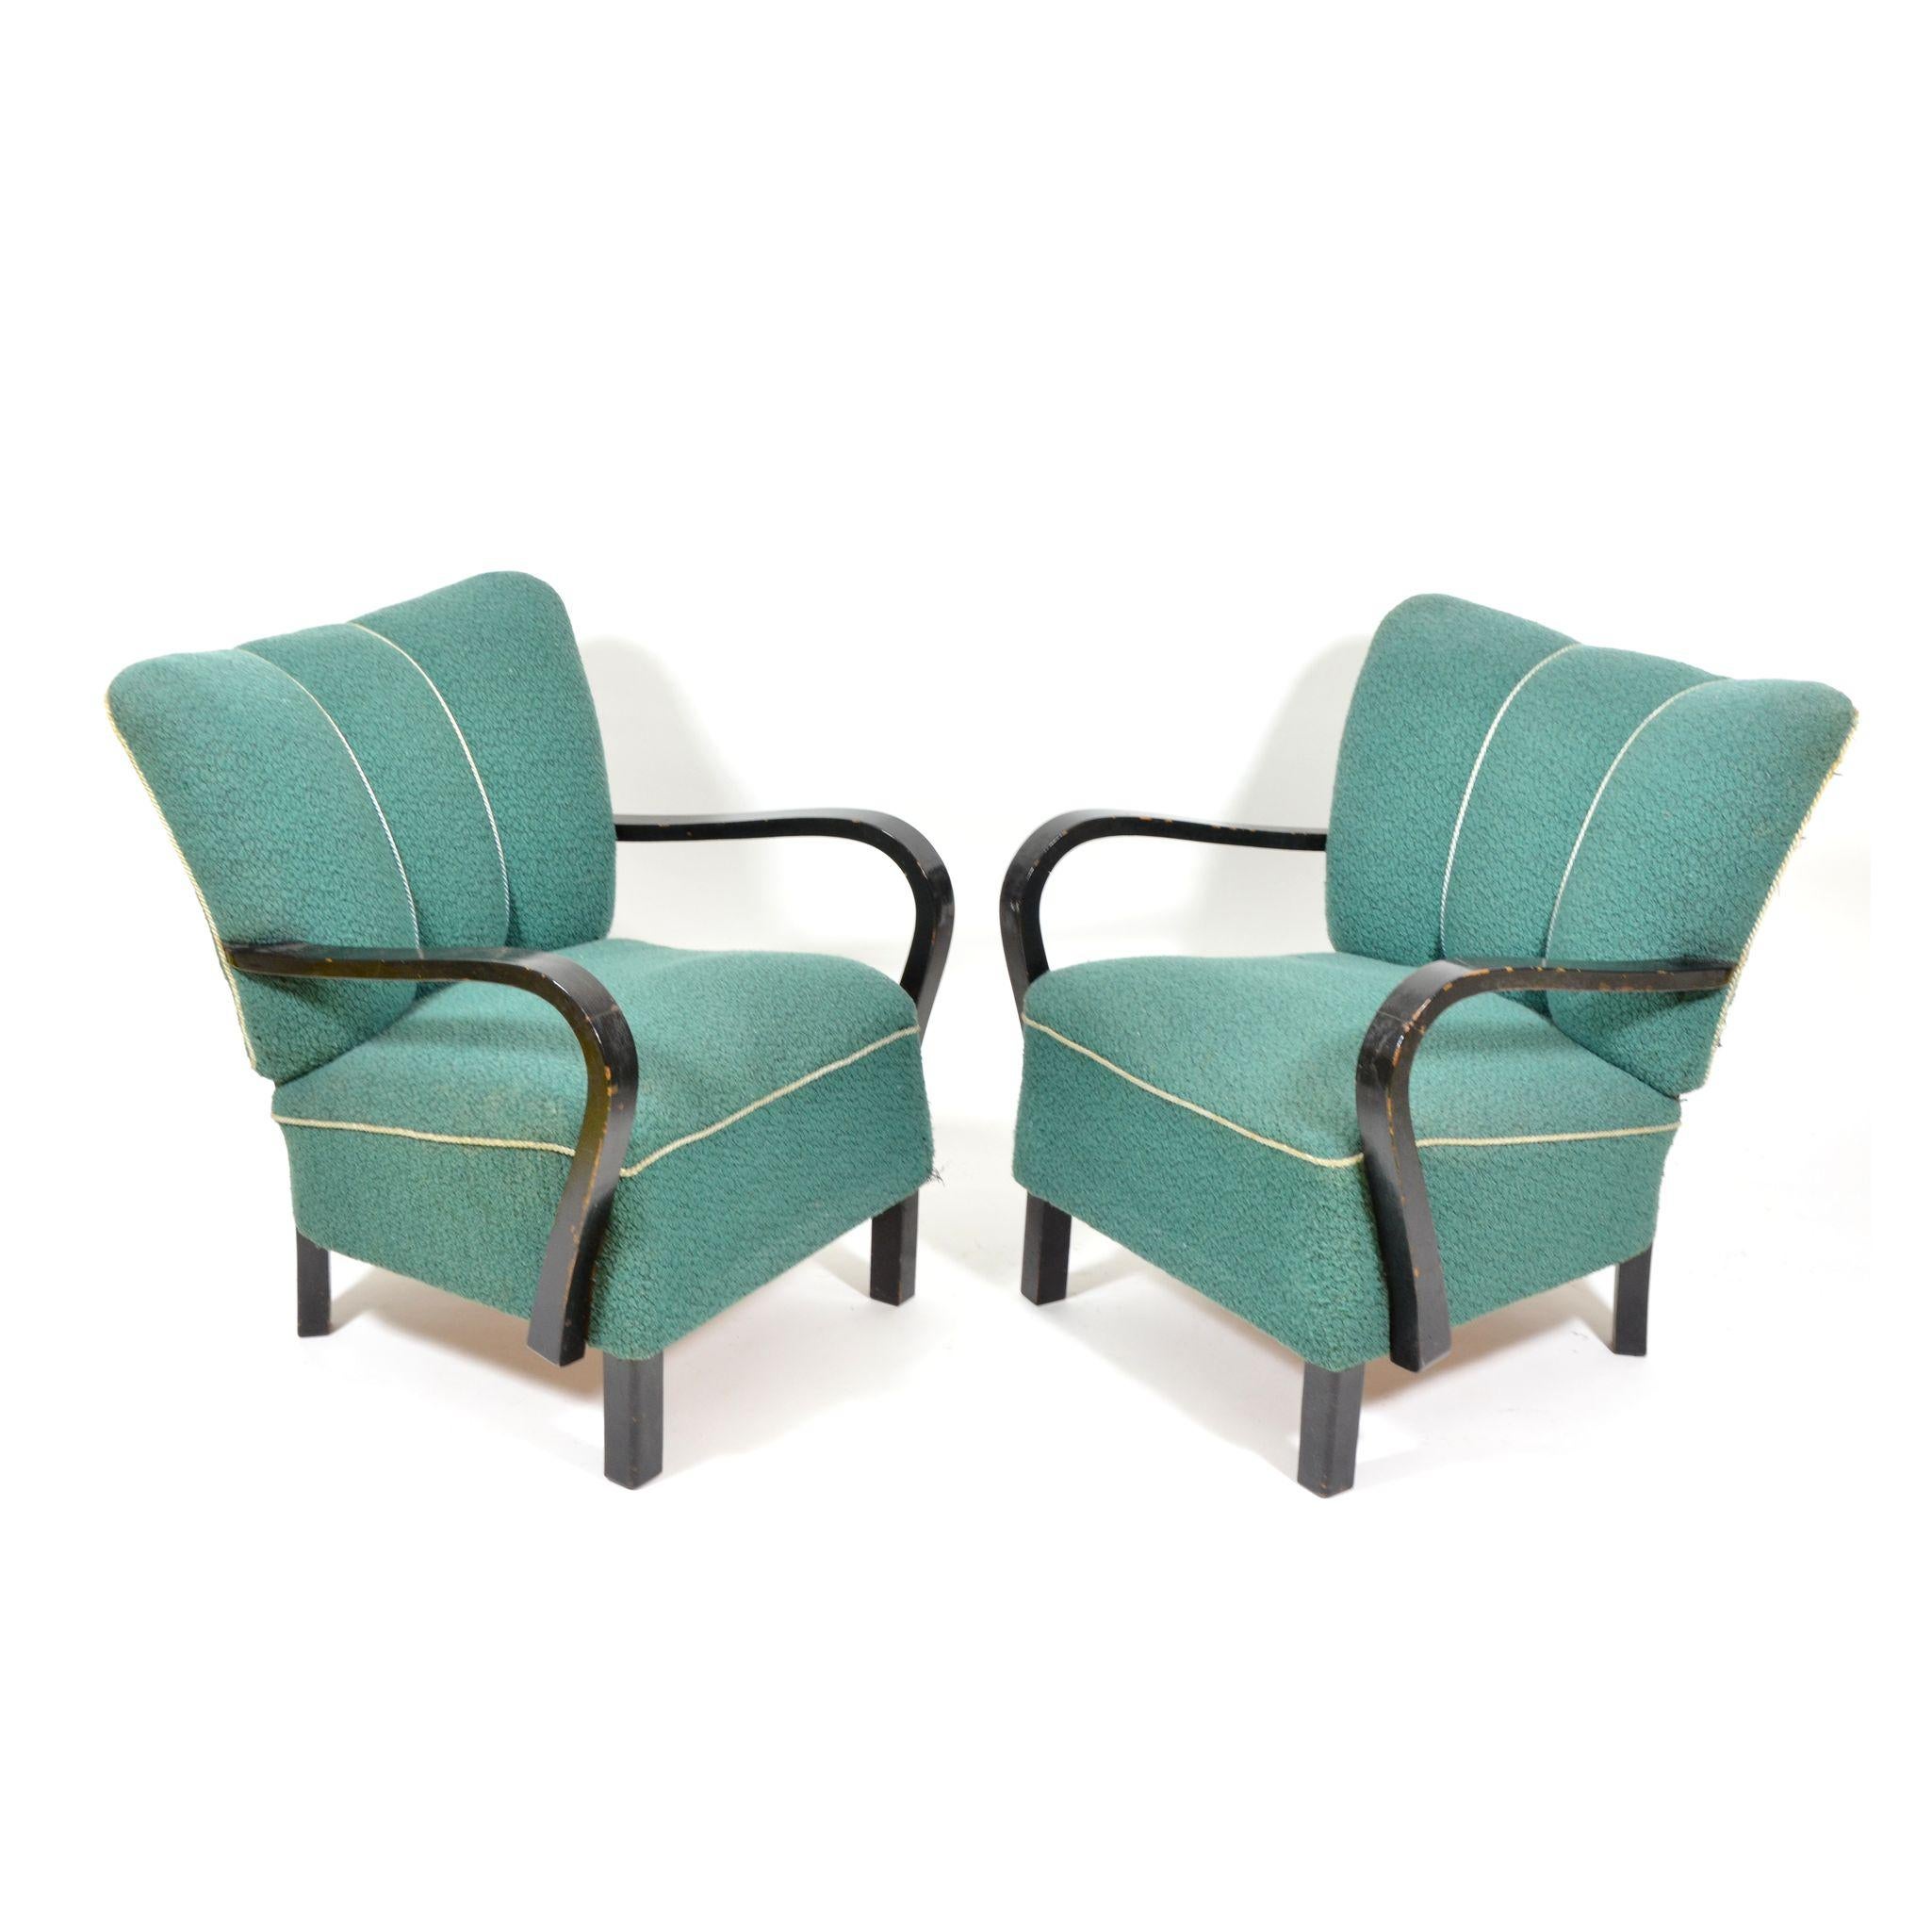 Fabric Pair of Original Armchairs with Wooden Armrests, Czechoslovakia, 1940s For Sale